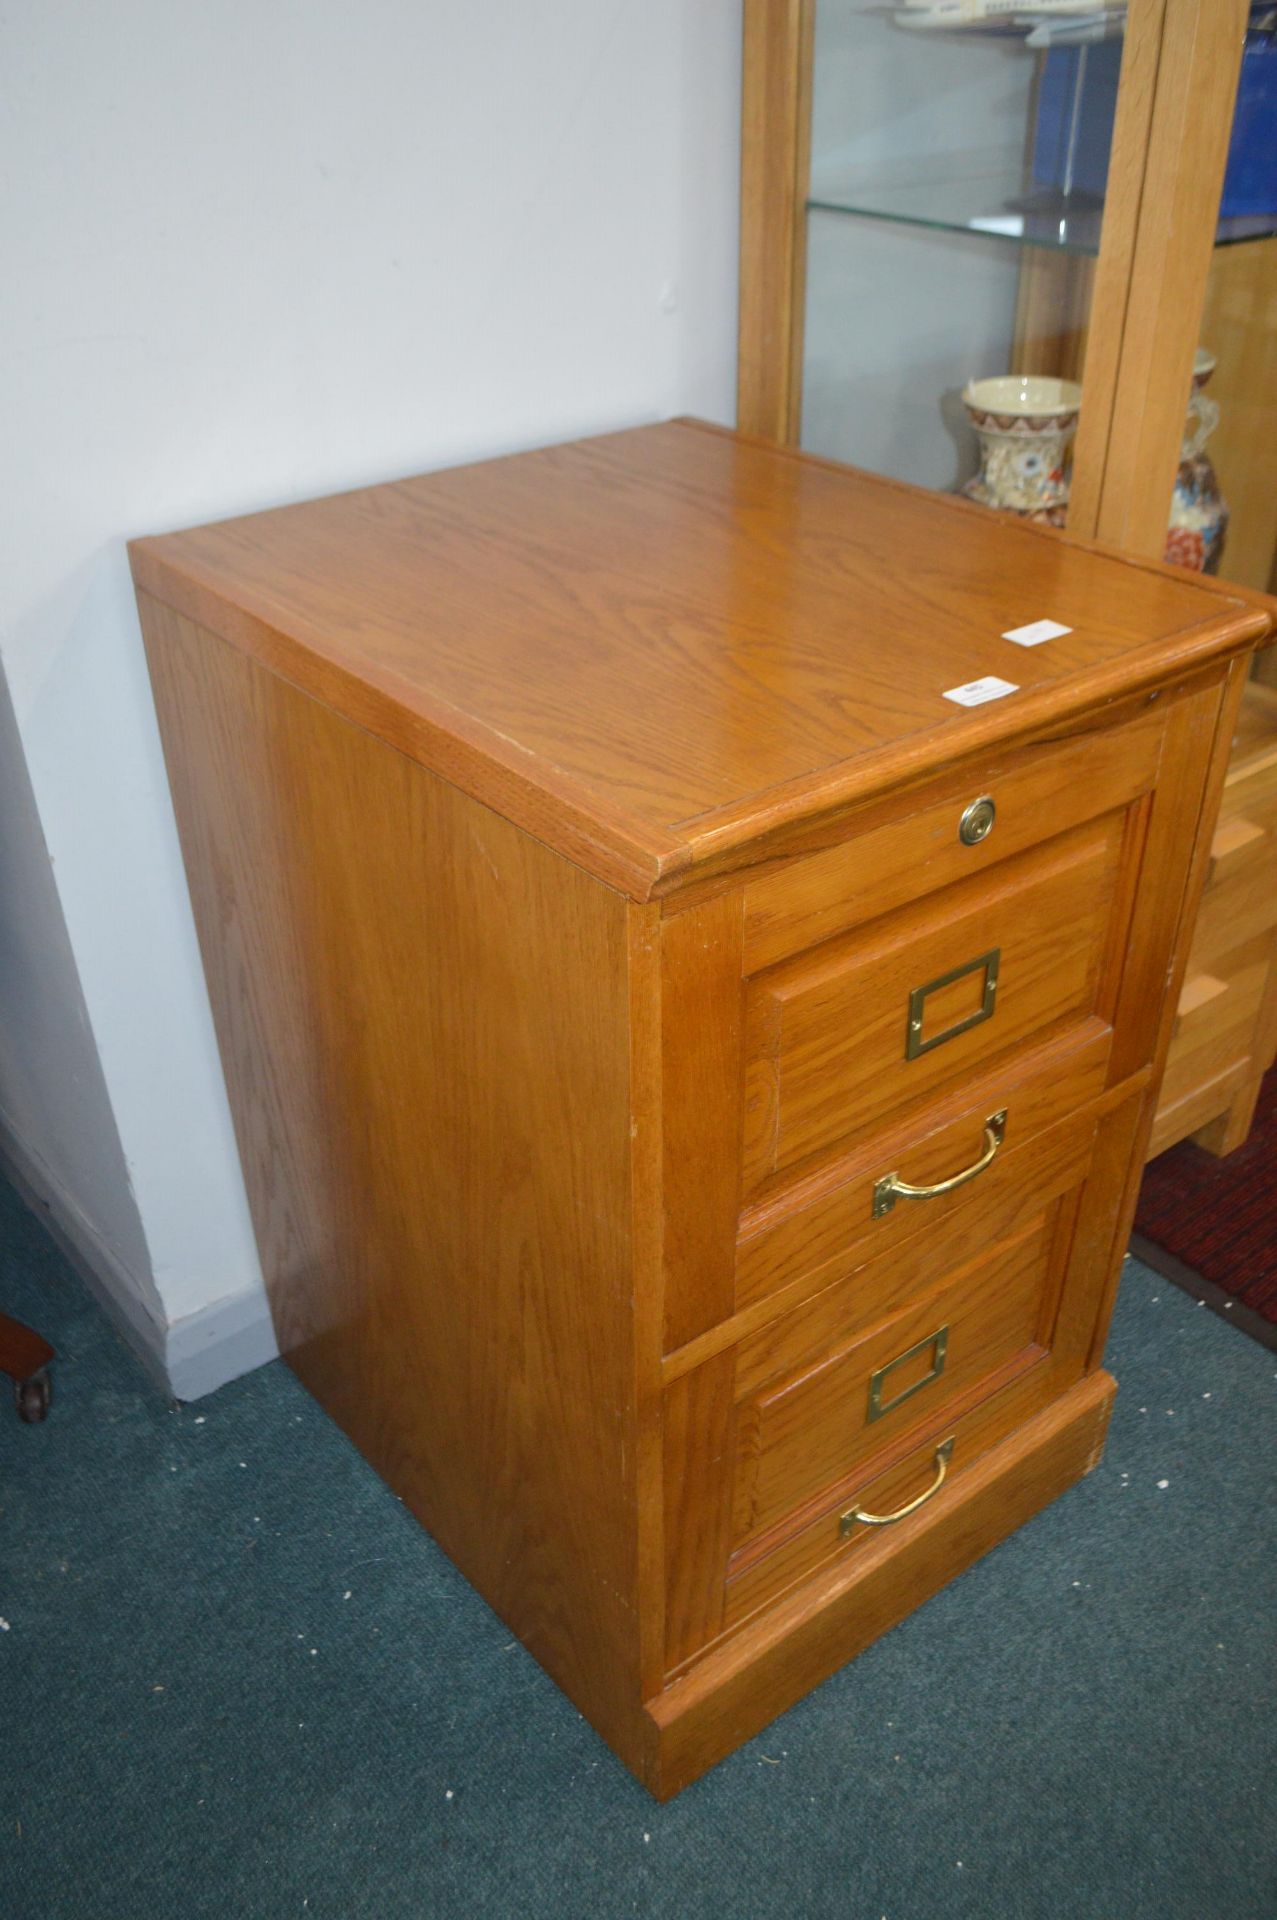 Two Drawer Home Filing Cabinet - Image 2 of 2